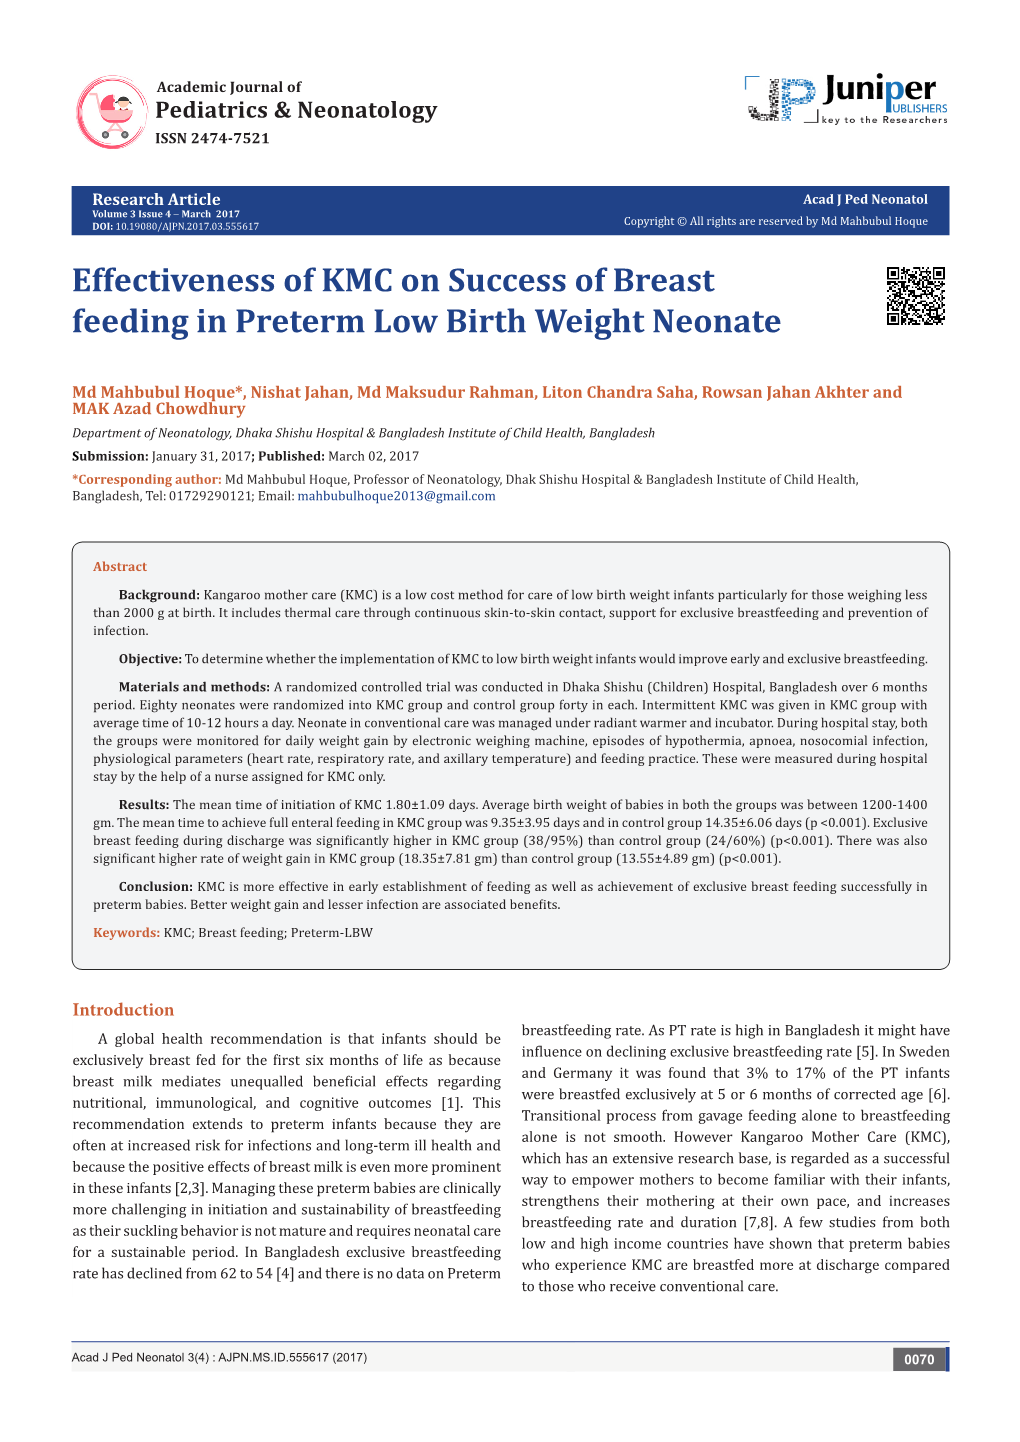 Effectiveness of KMC on Success of Breast Feeding in Preterm Low Birth Weight Neonate